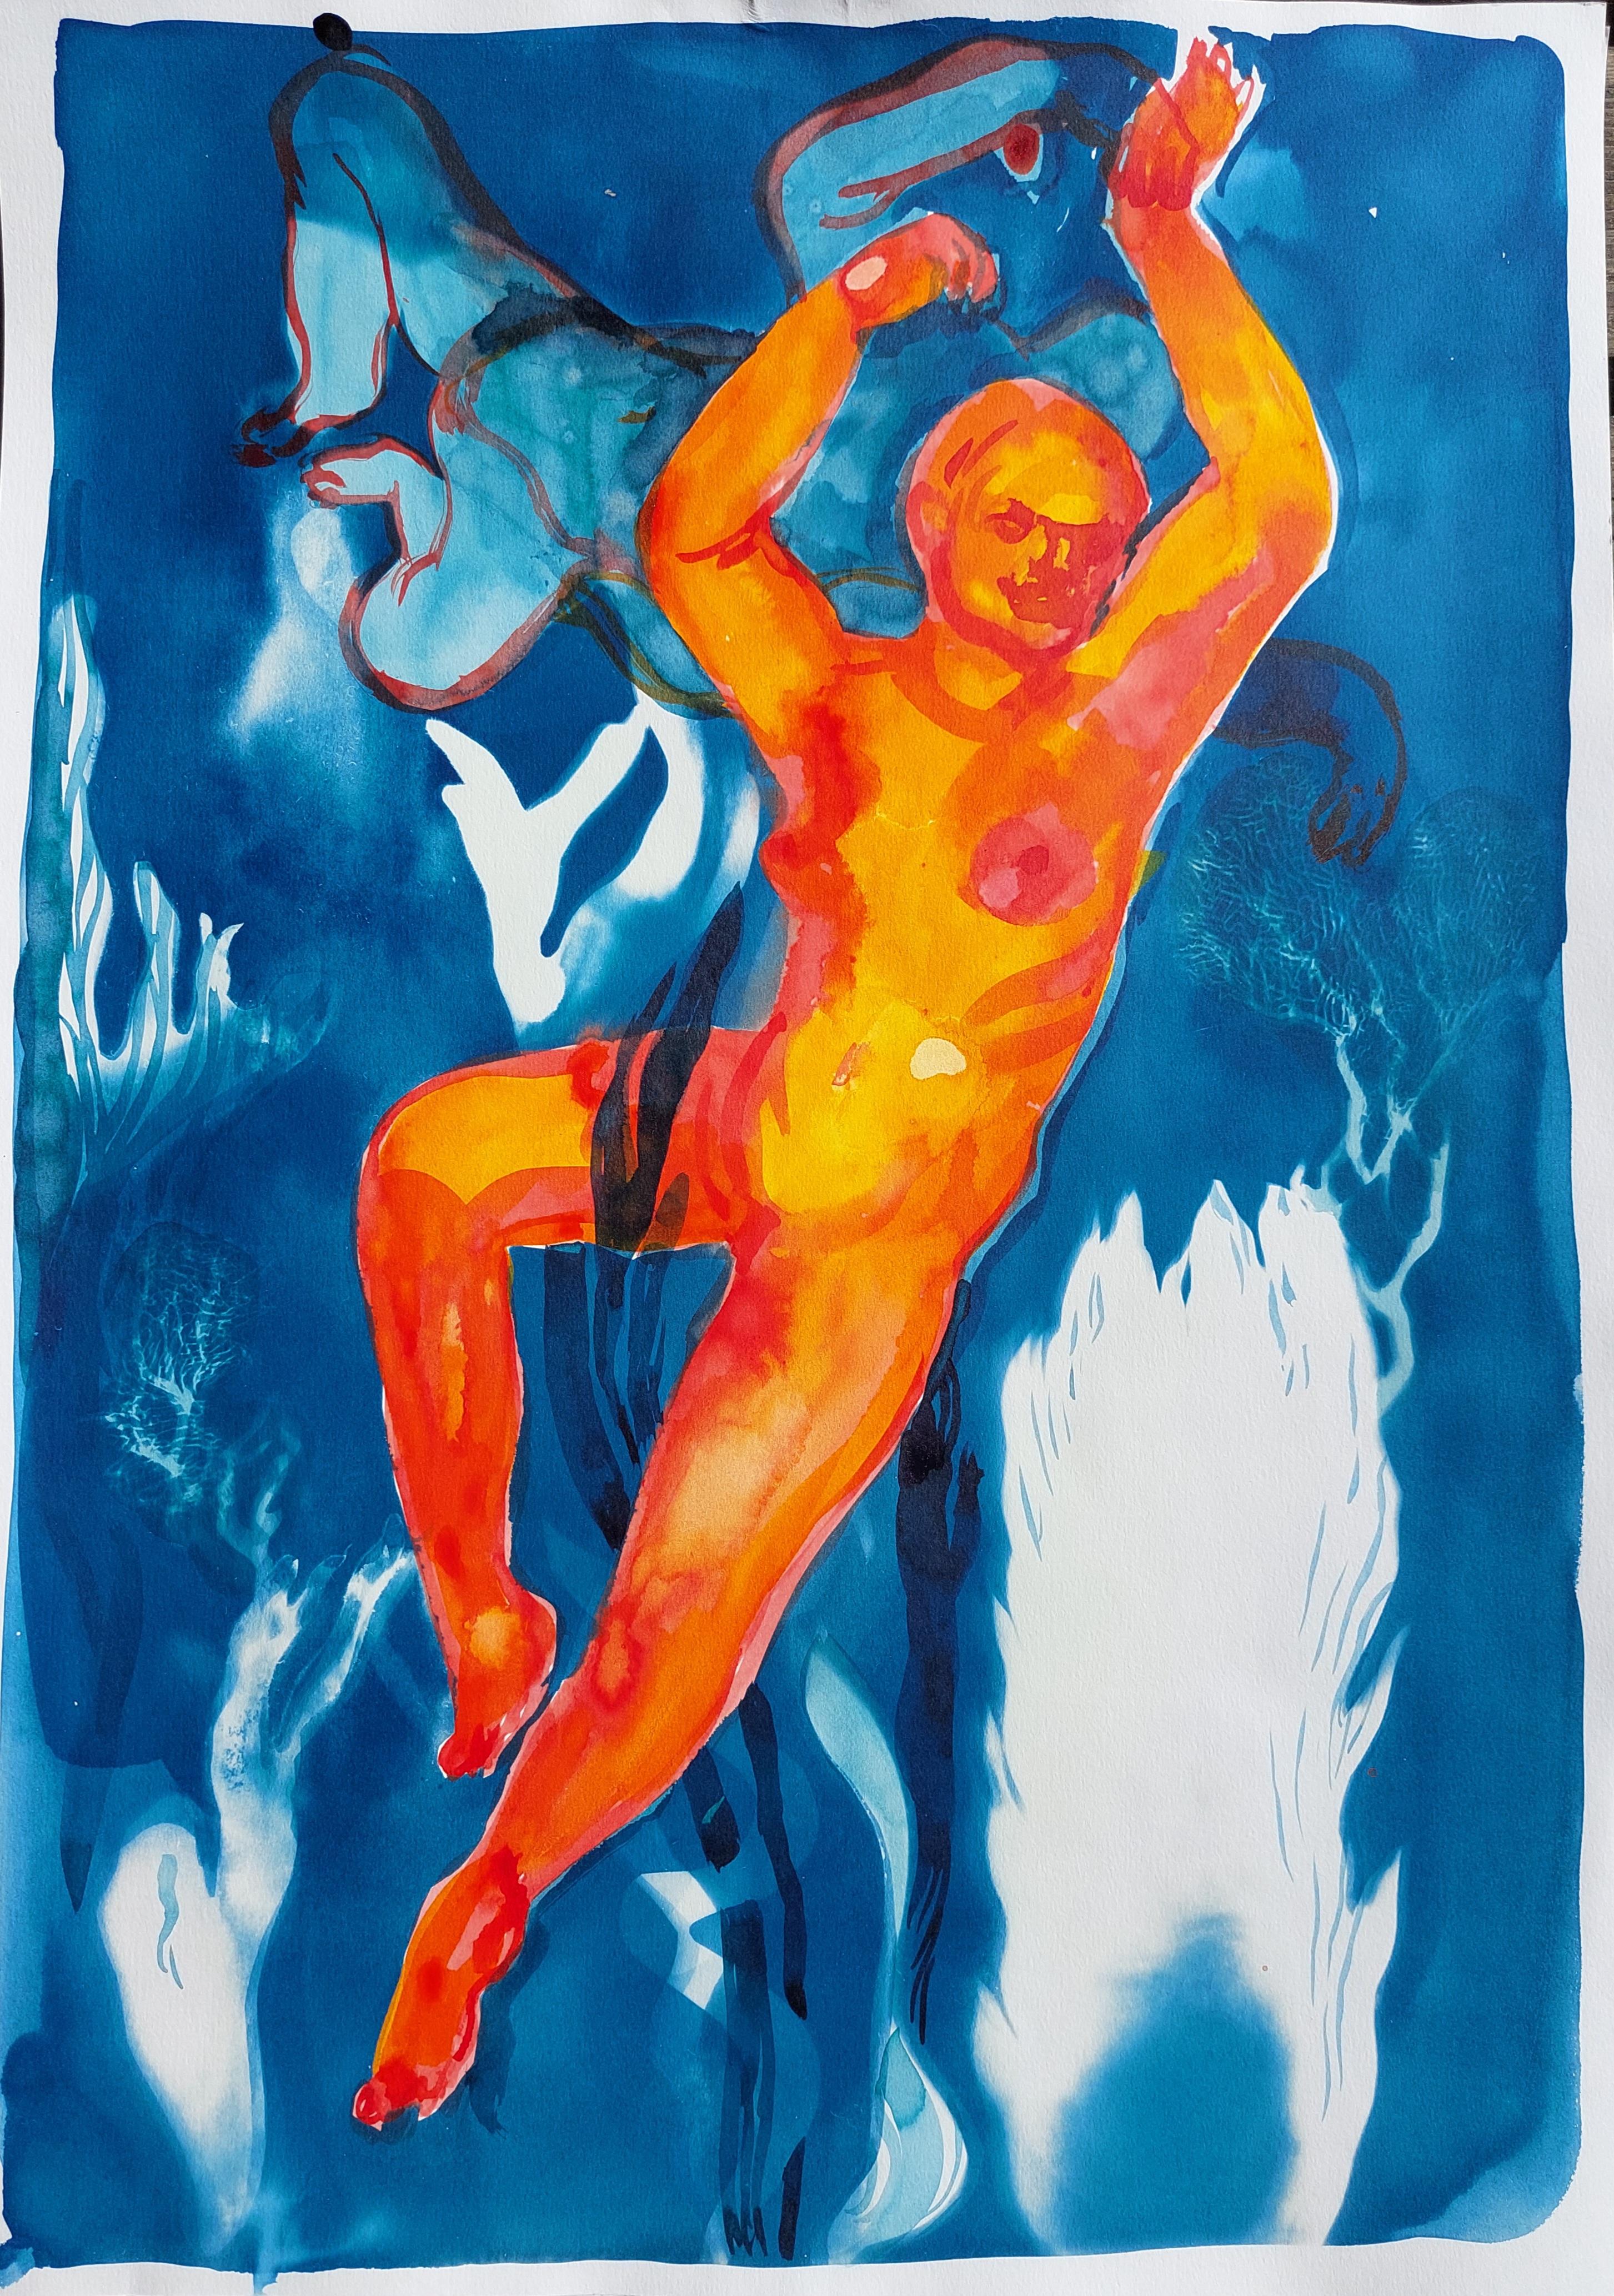 Untitled  - An Orange Figure In The Water,  Ink and Cyanotype - New Expression